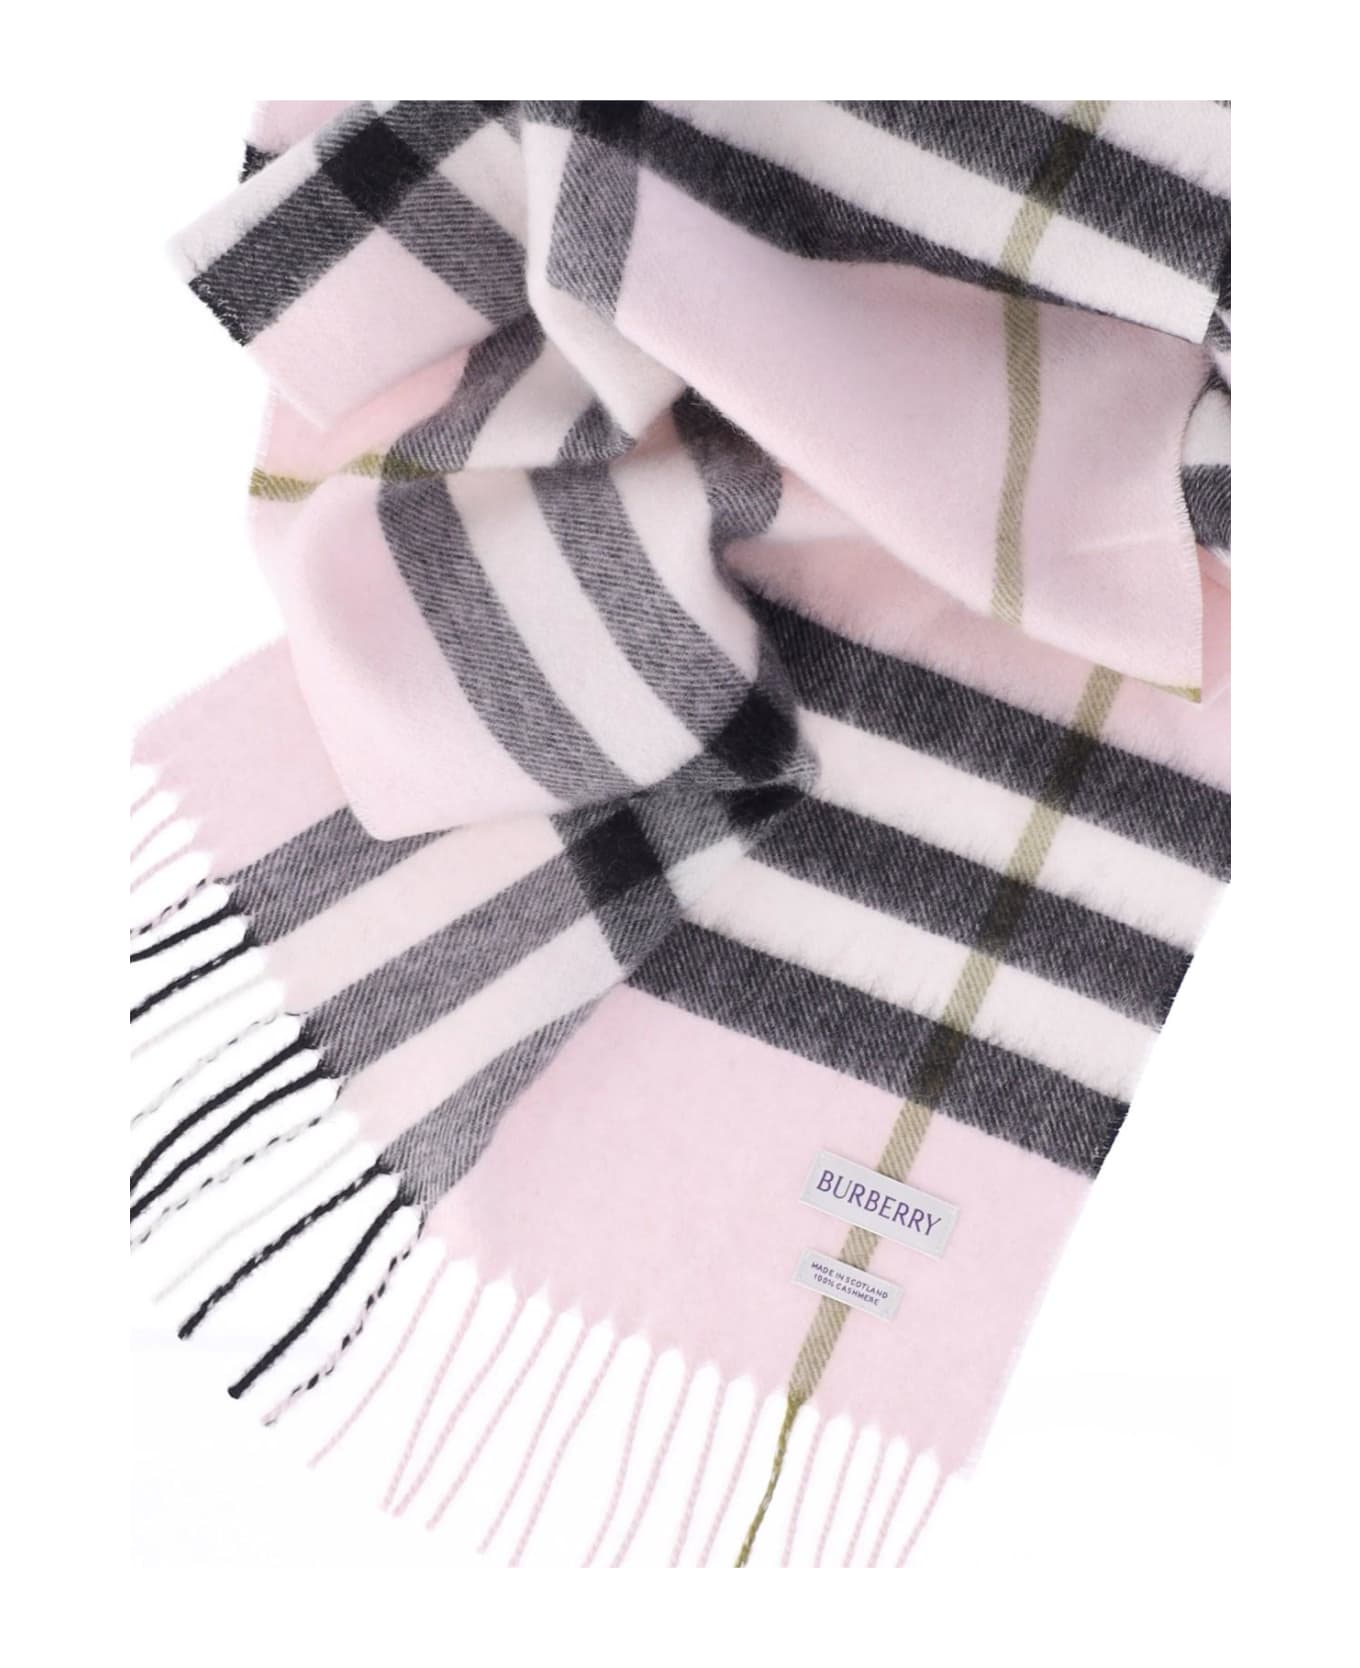 Burberry 'check' Scarf - Pale Candy Pink